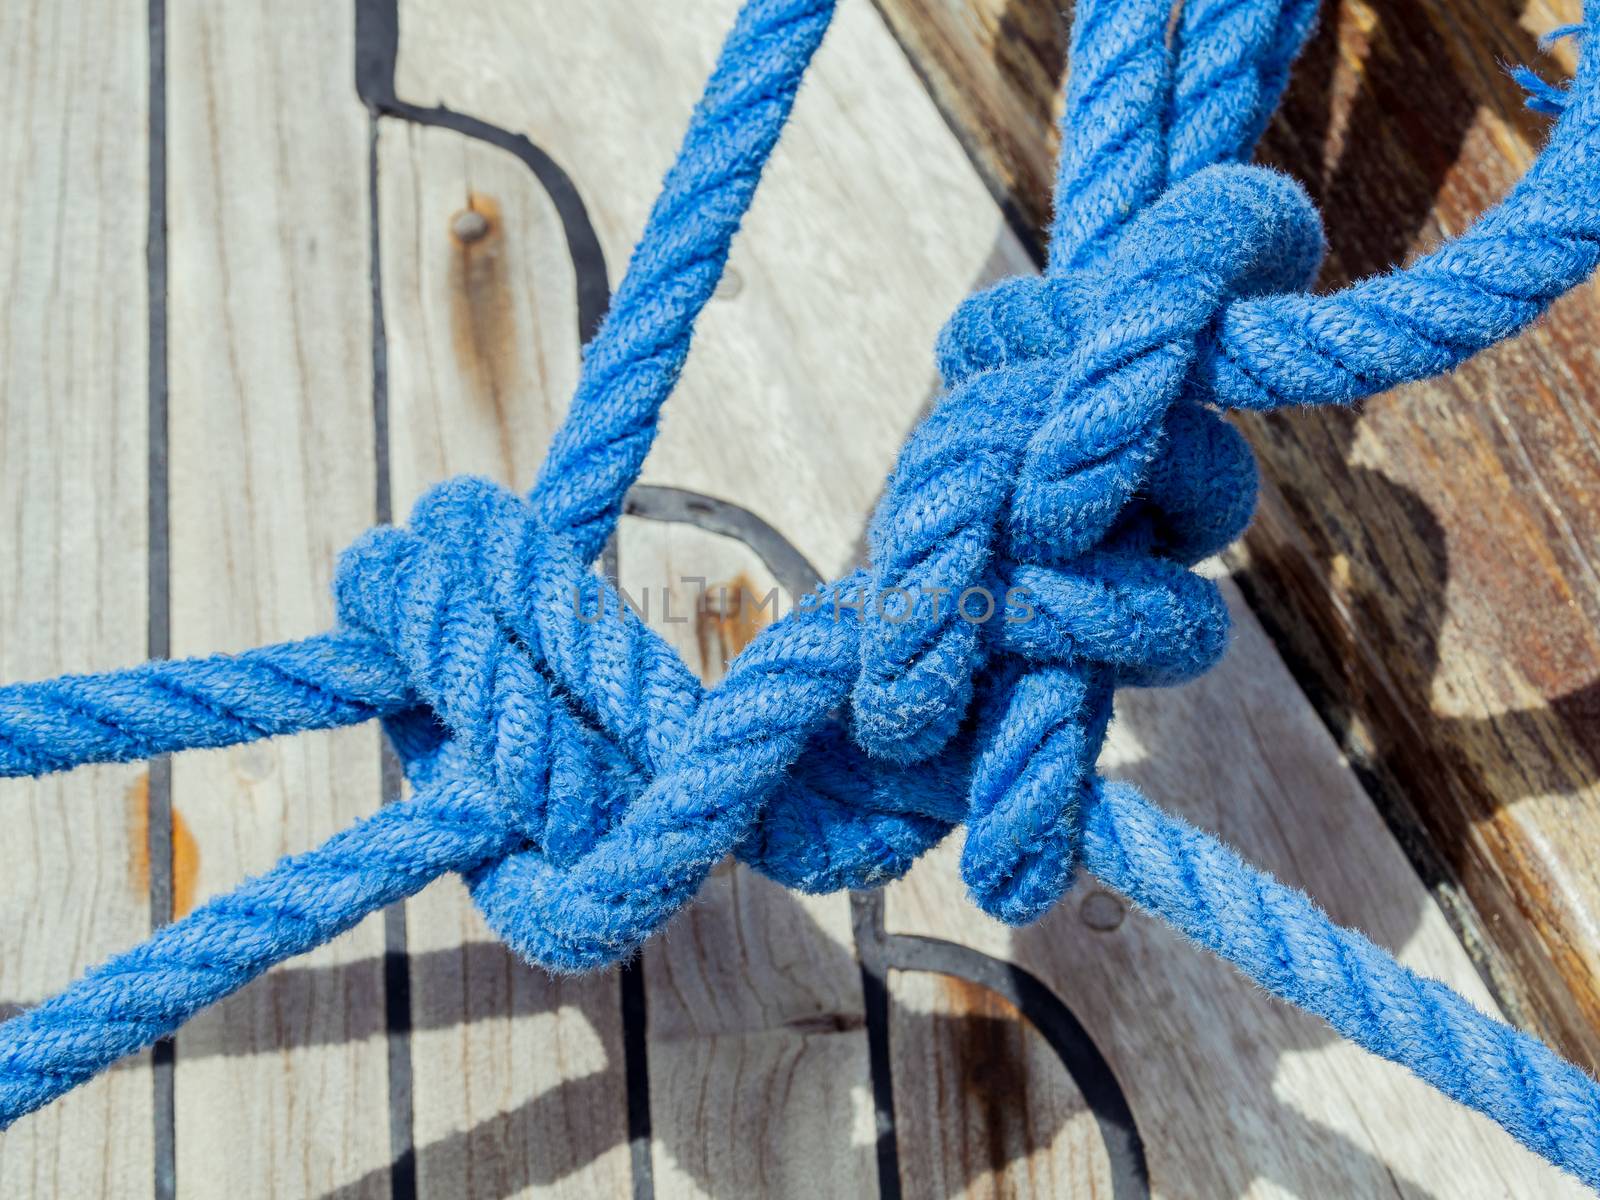 Knot of the rope on on sailing yacht travel from Ko Samui to Ko Phangan ,Thailand